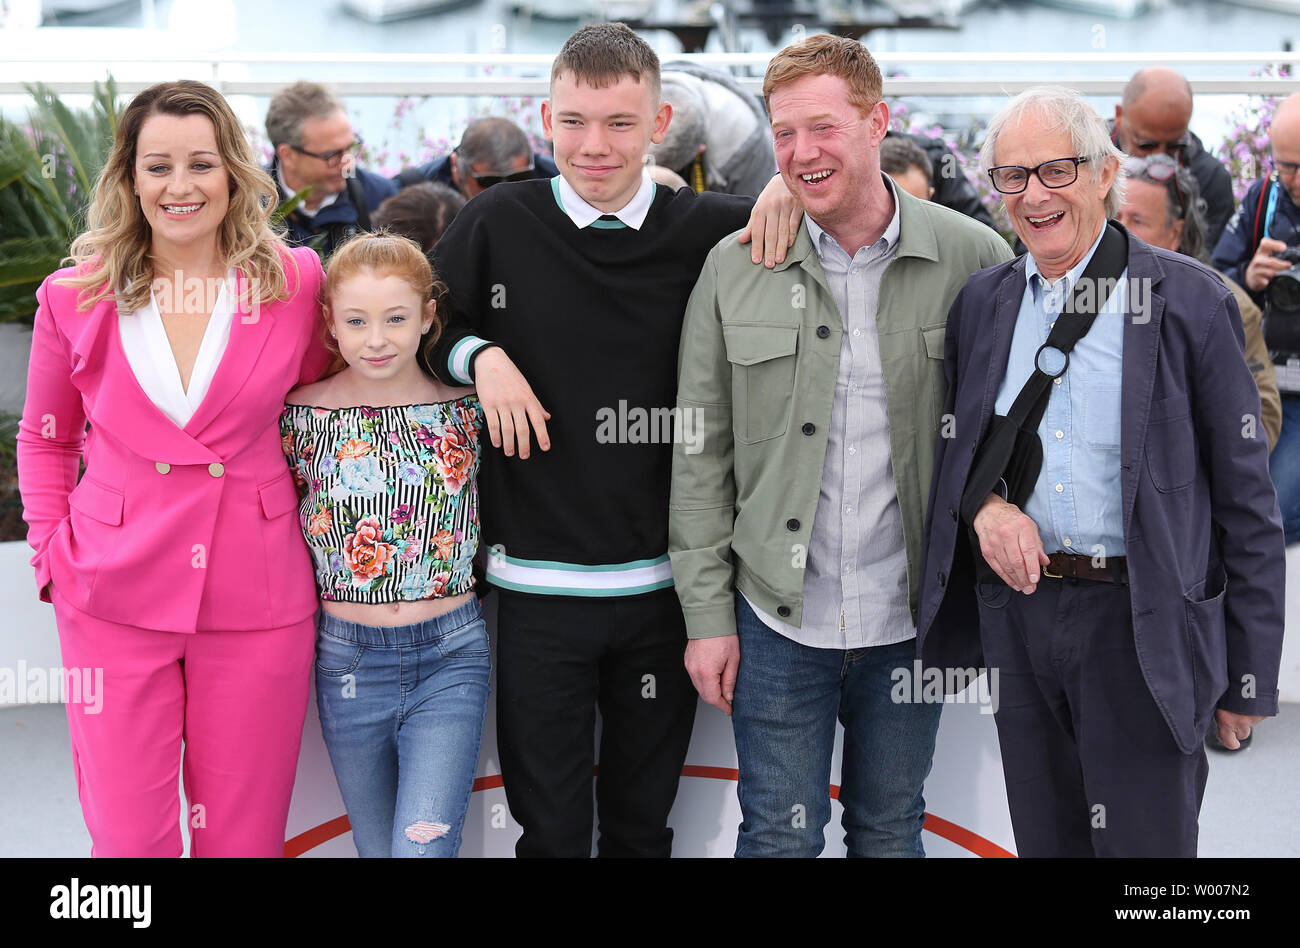 (From L to R) Debbie Honeywood, Katie Proctor, Rhys Stone, Kris Hitchen and Ken Loach arrive at a photocall for the film 'Sorry We Missed You' during the 72nd annual Cannes International Film Festival in Cannes, France on May 17, 2019.  Photo by David Silpa/UPI Stock Photo